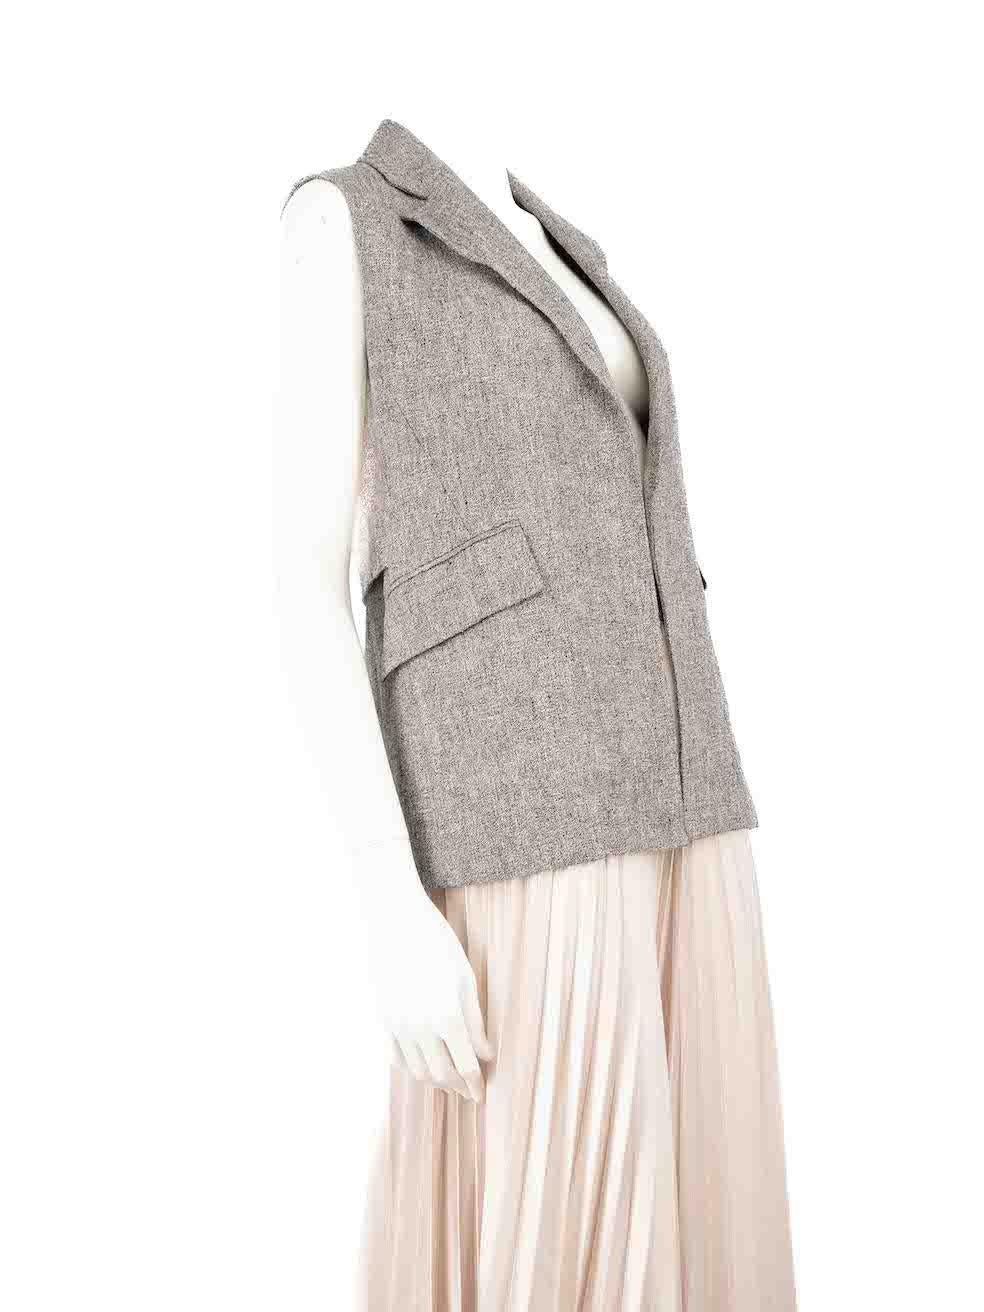 CONDITION is Very good. Minimal wear to the blazer coat is evident. Minimal wear to the left bottom side is seen with a discolouration mark on this used Theory designer resale item.
 
 
 
 Details
 
 
 Grey
 
 Linen
 
 Sleeveless vest
 
 Mid length
